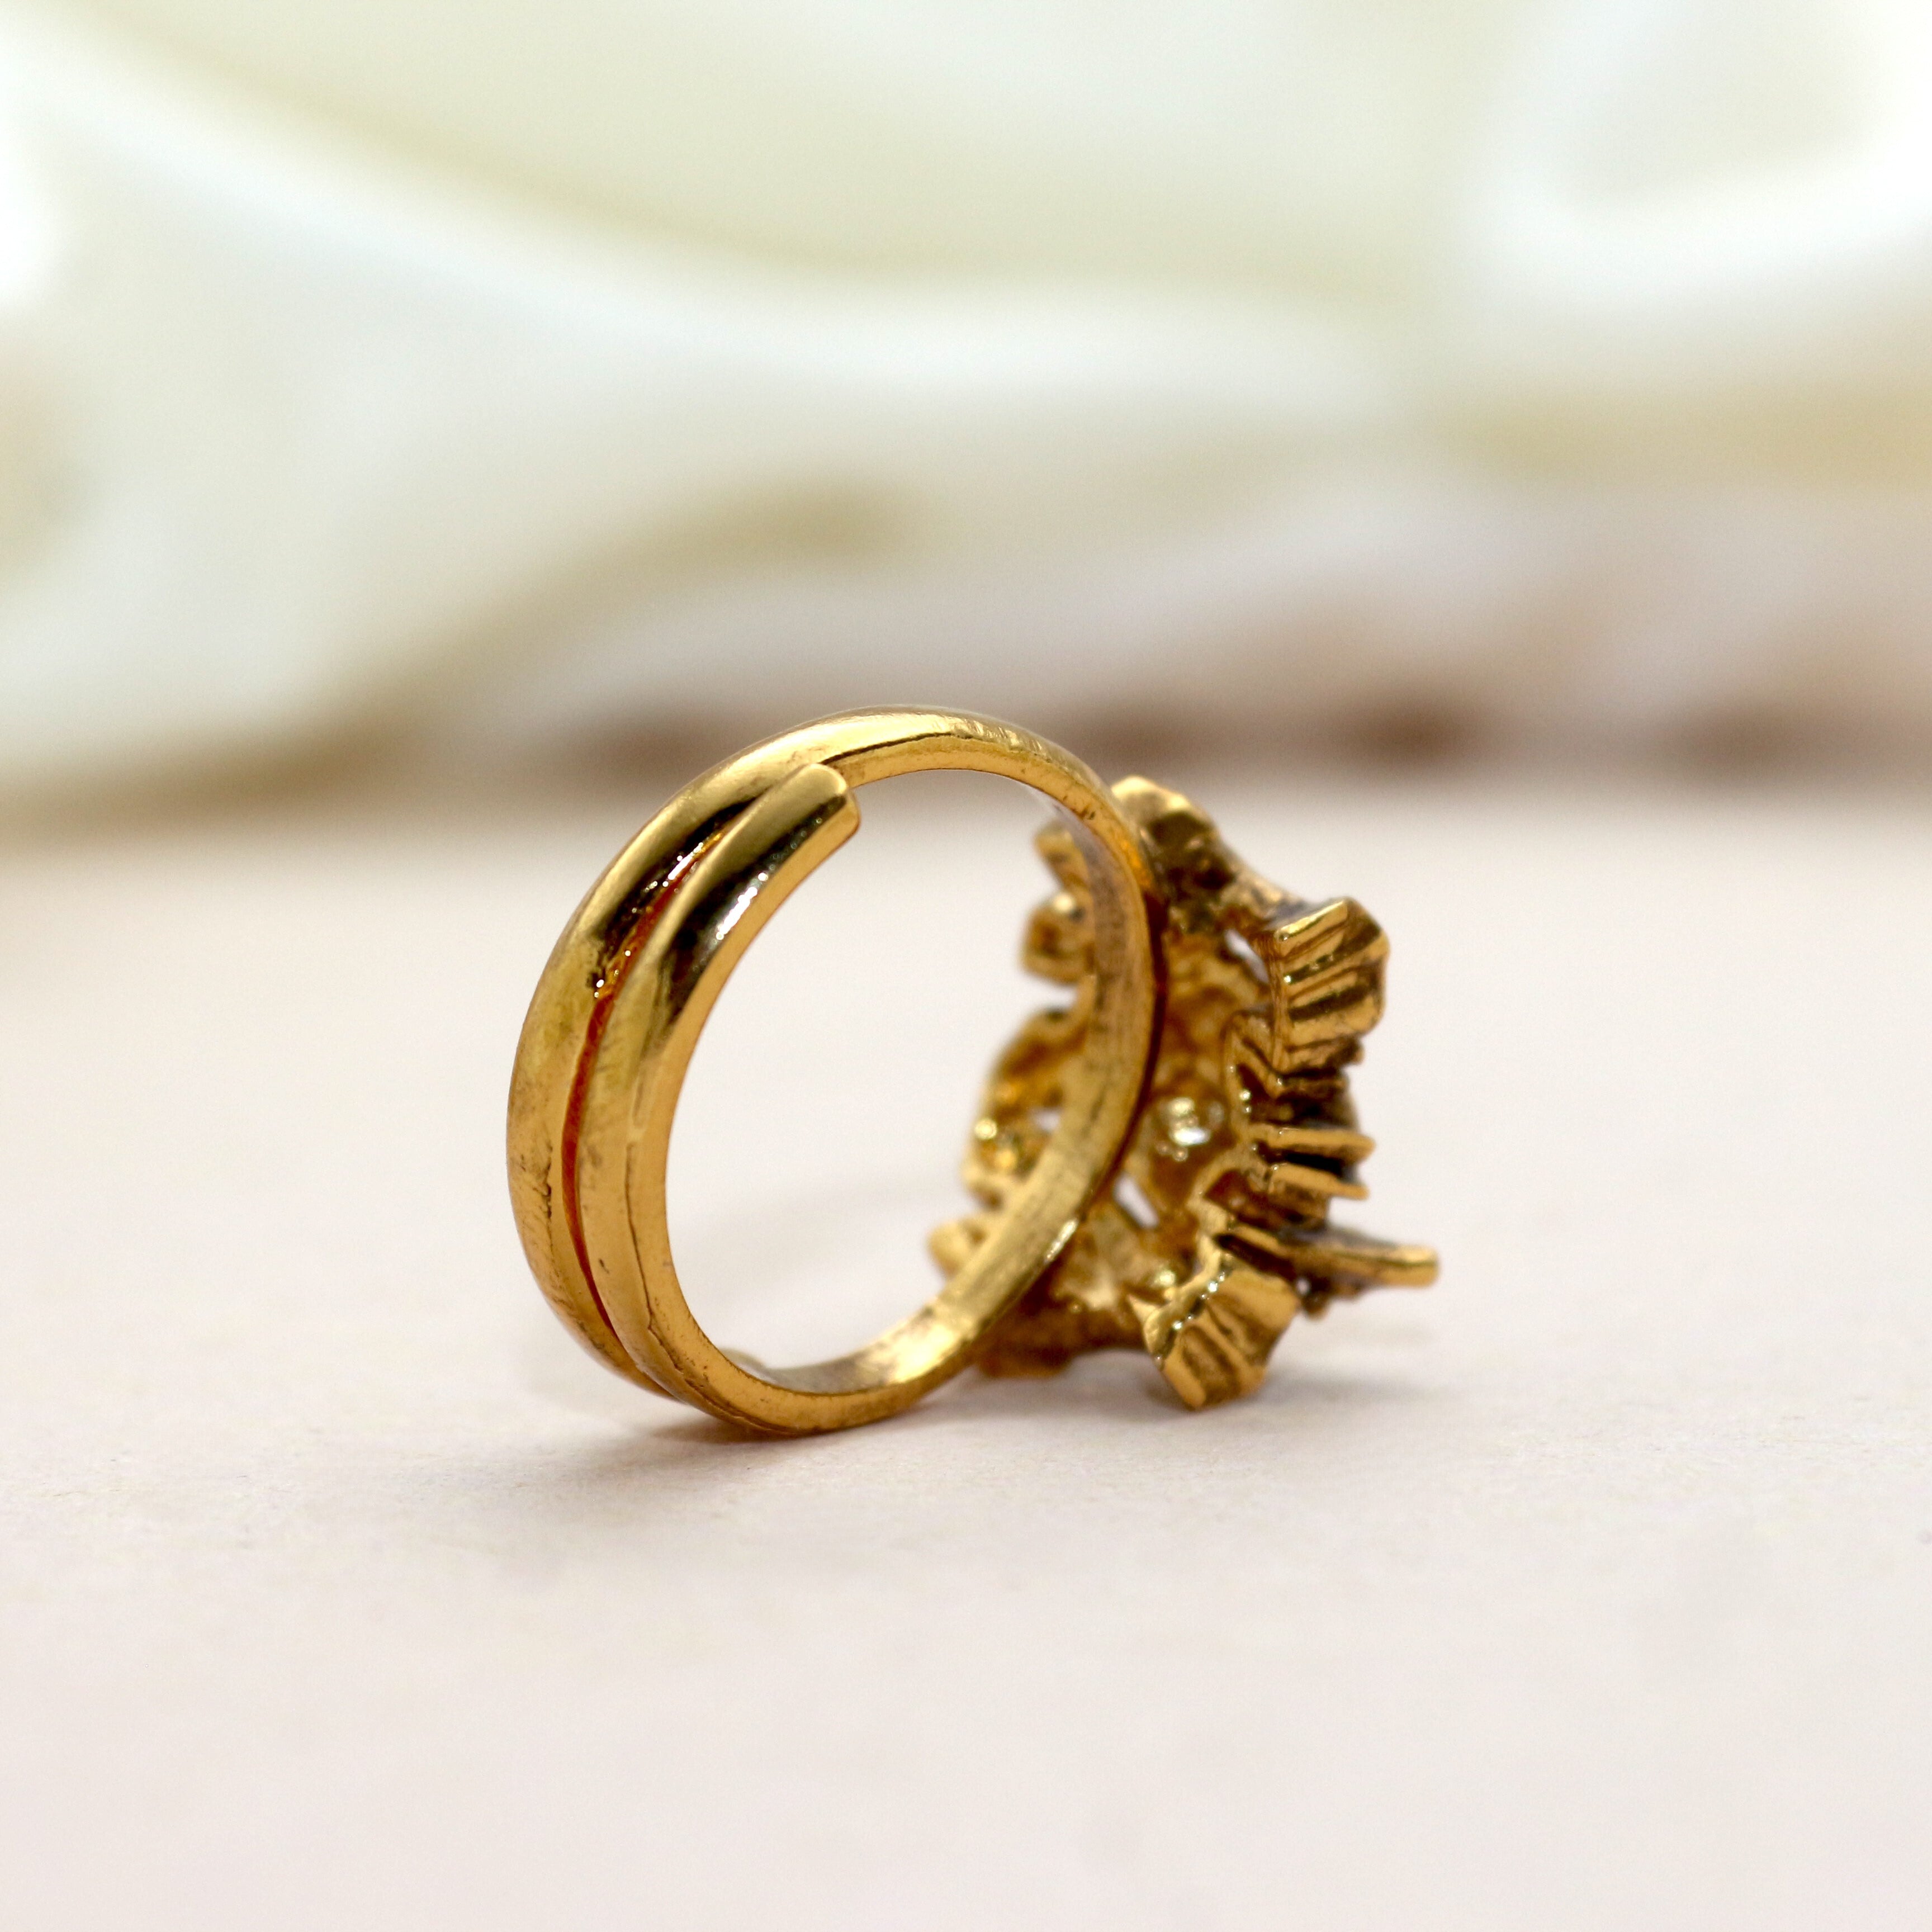 Dilbar Traditional Antique Gold Plated Finger Ring – KaurzCrown.com